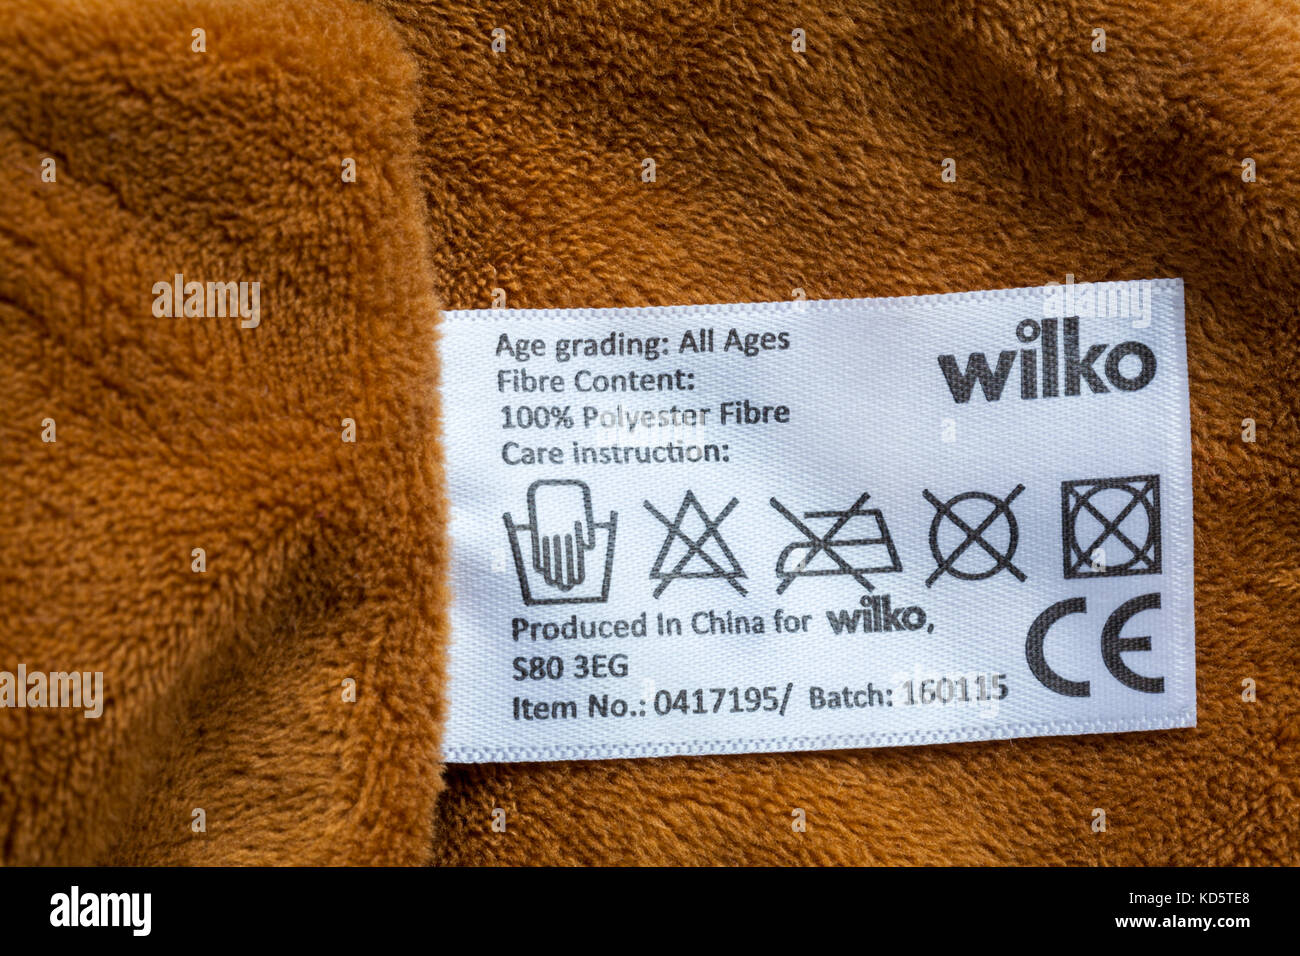 Care washing symbols and instructions on label Wilko comforter produced in China for Wilko 100% polyester fibre CE symbol Stock Photo